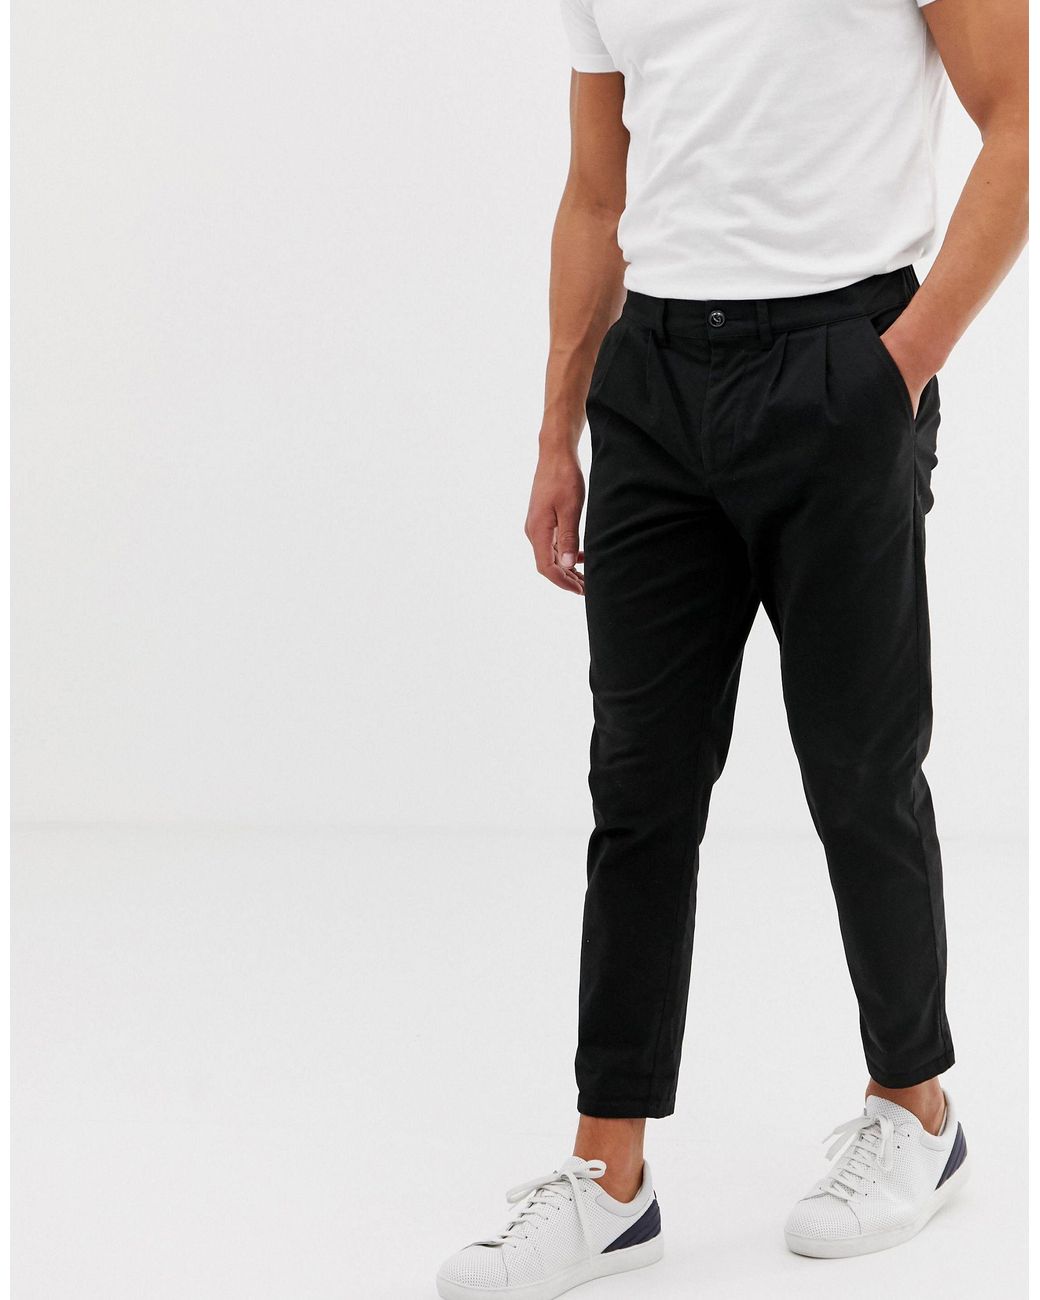 ASOS Denim Cigarette Chinos With Pleats in Black for Men - Lyst